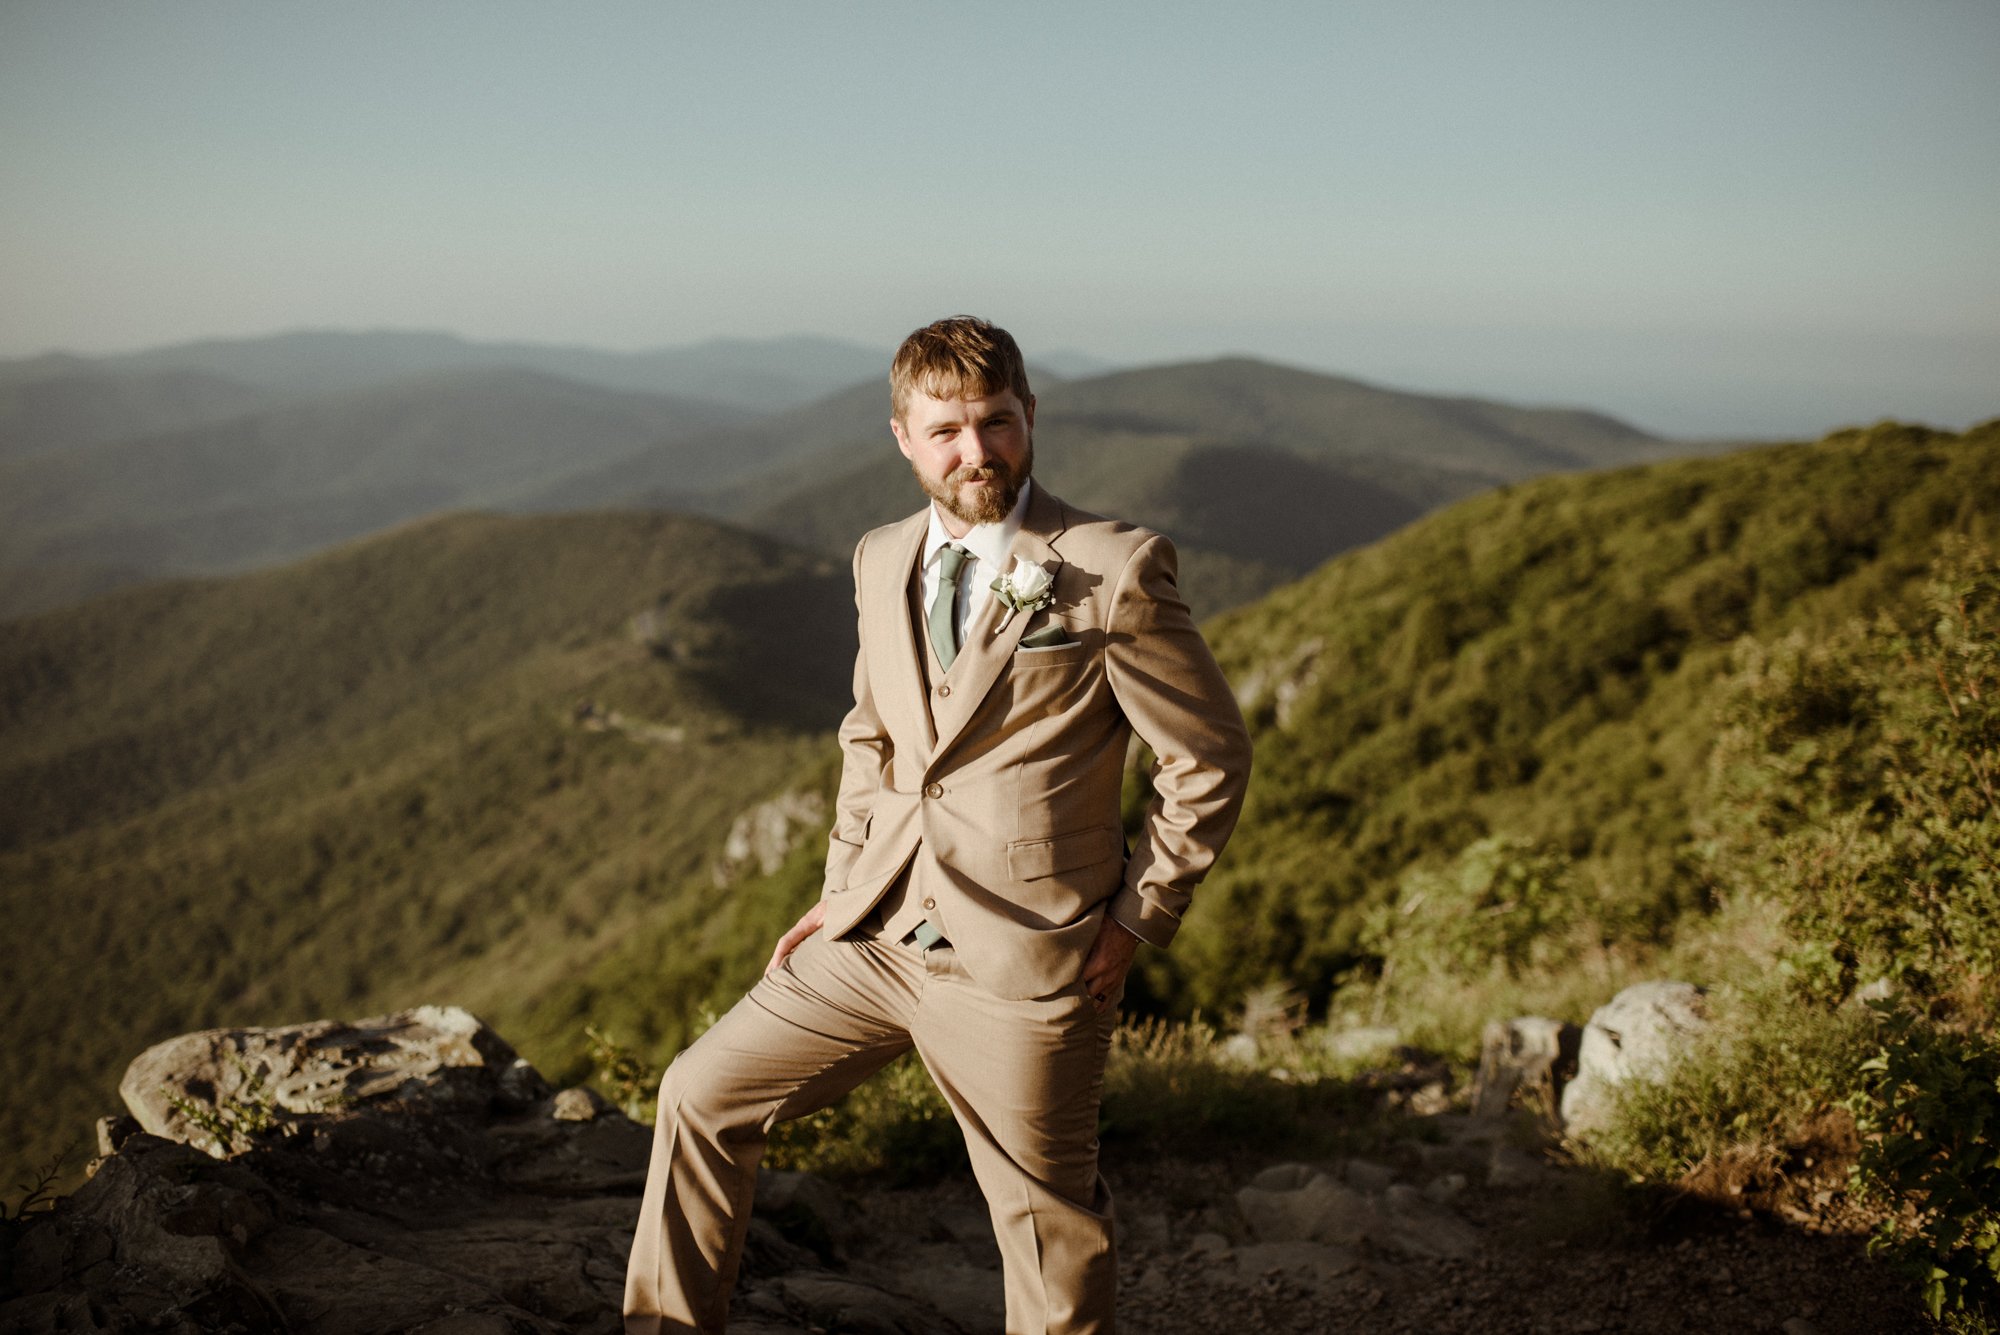 Sunset Elopement on Stony Man Summit in Shenandoah National Park - White Sails Creative Elopement Photography - July Elopement on the Blue Ridge Parkway_49.jpg